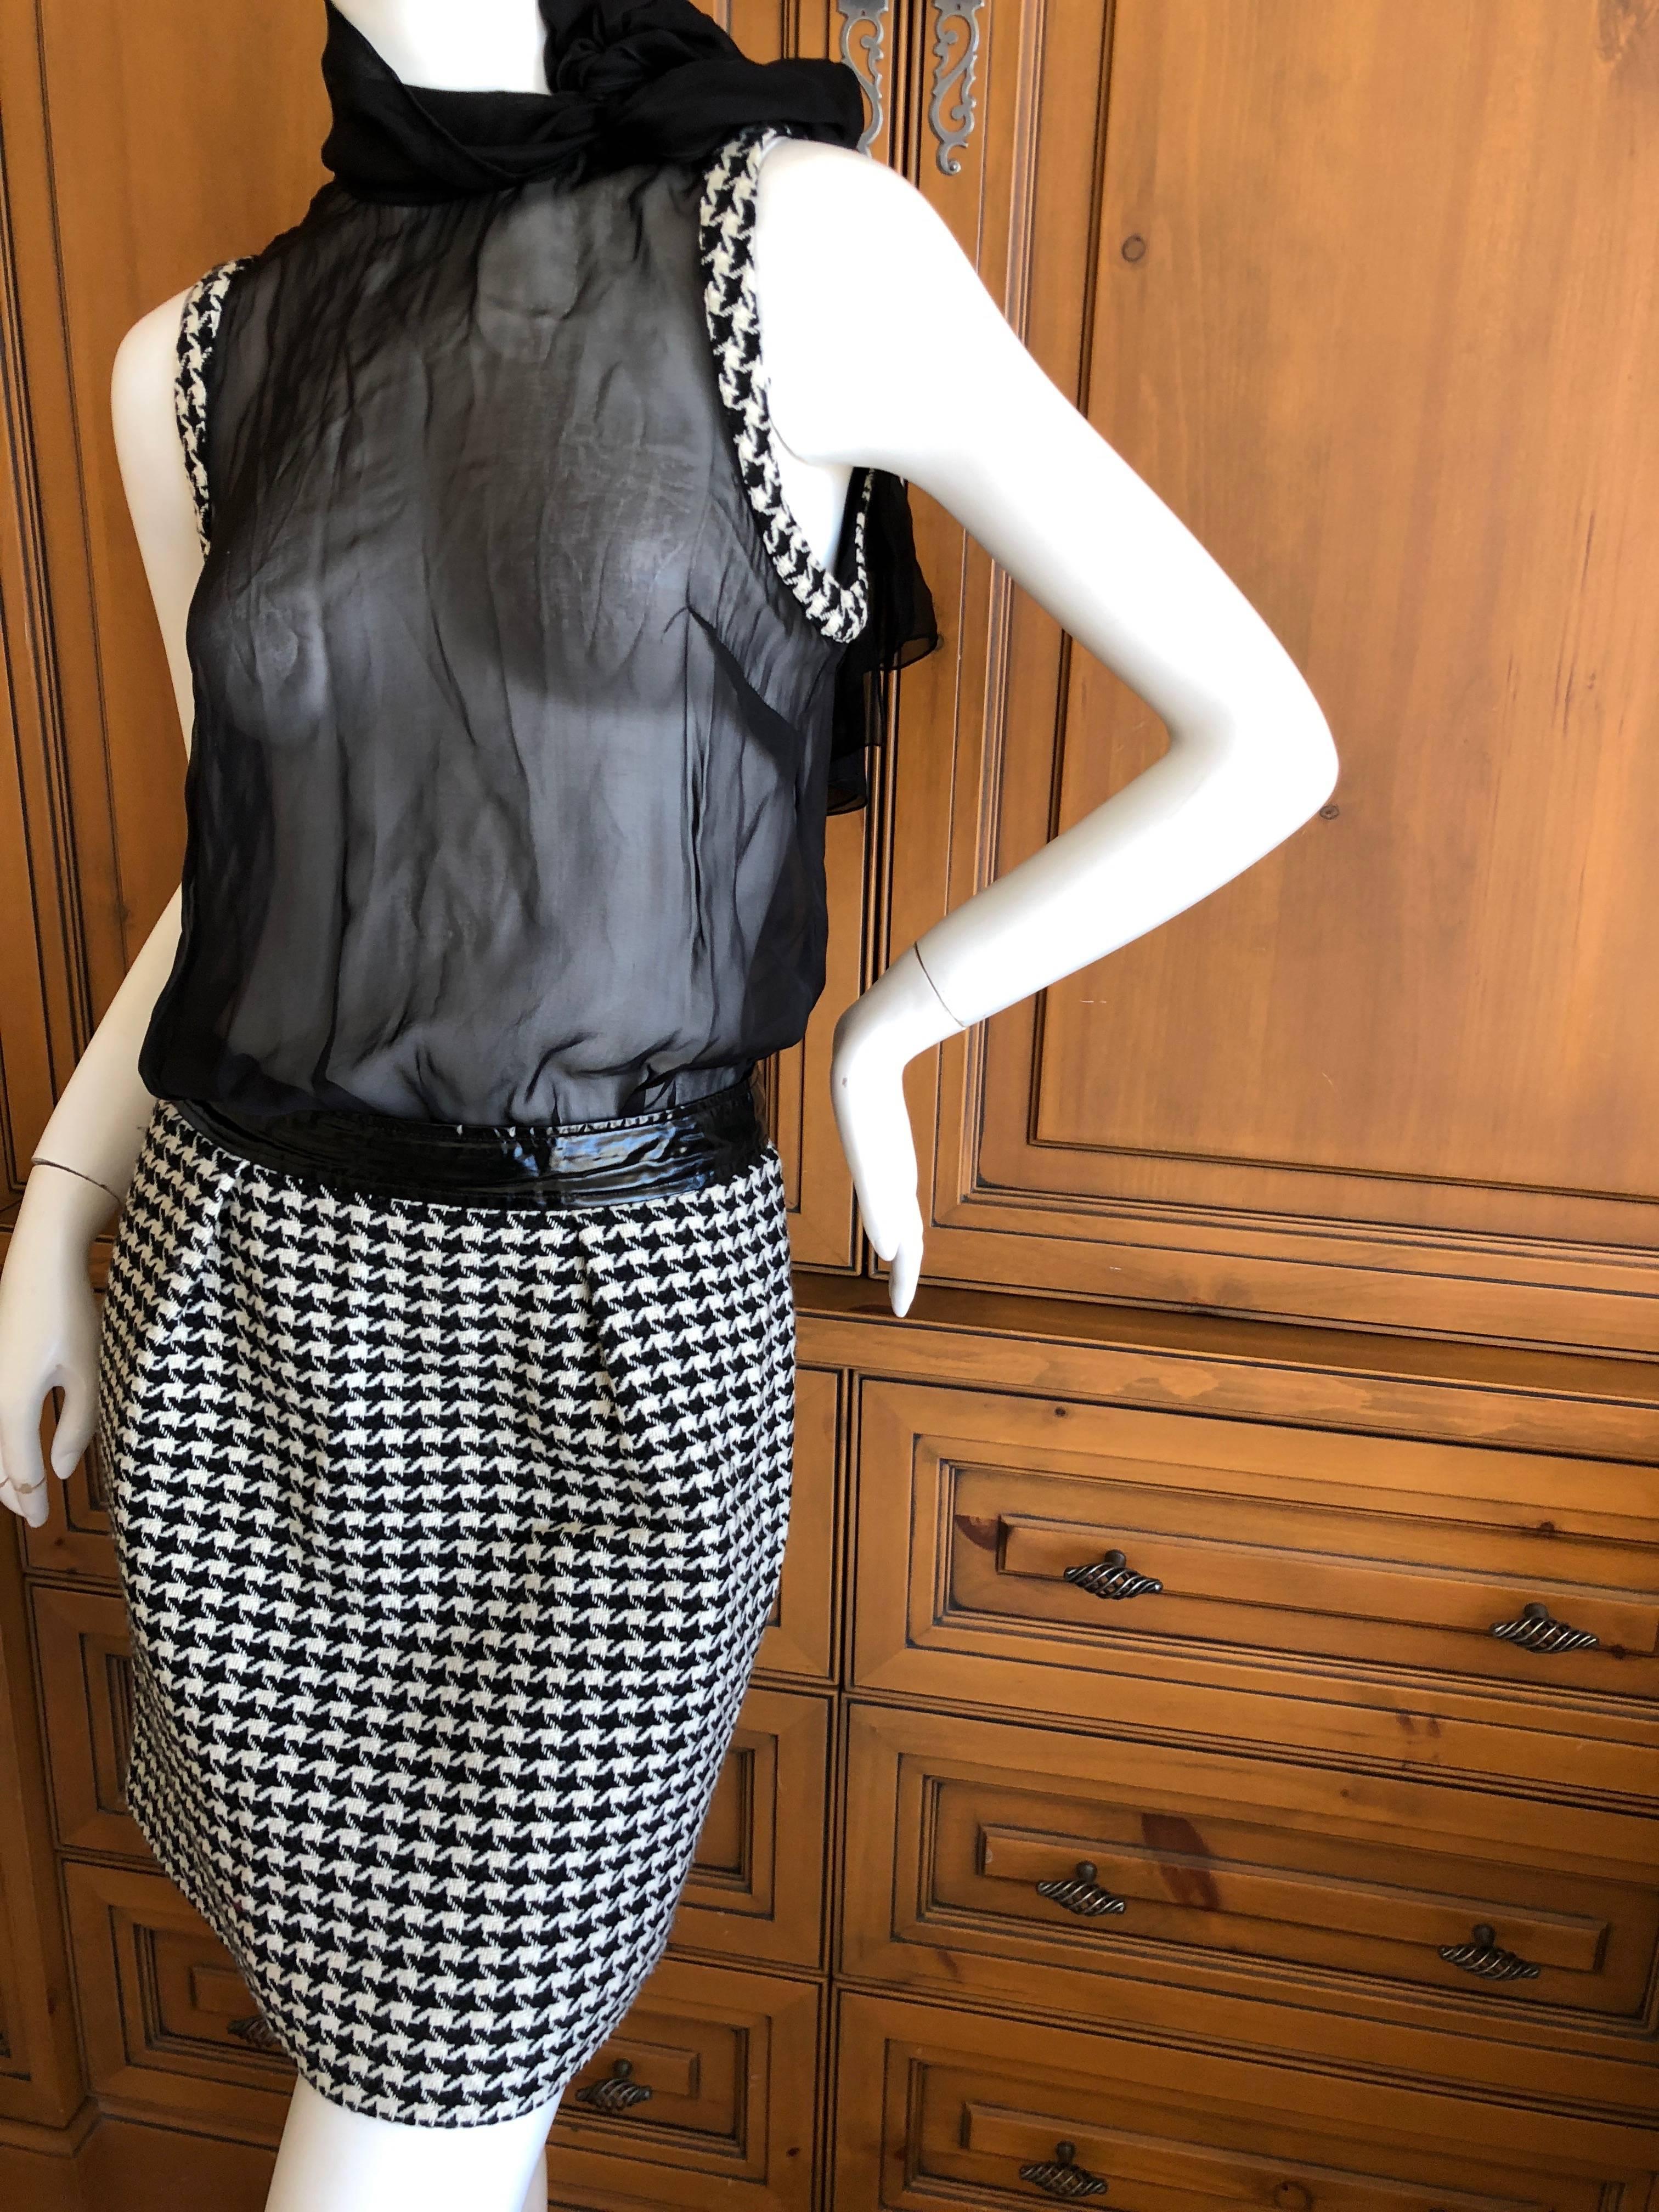 Dolce & Gabbana D&G Vintage Sheer Houndstooth Dress with Pussy Bow In Excellent Condition For Sale In Cloverdale, CA